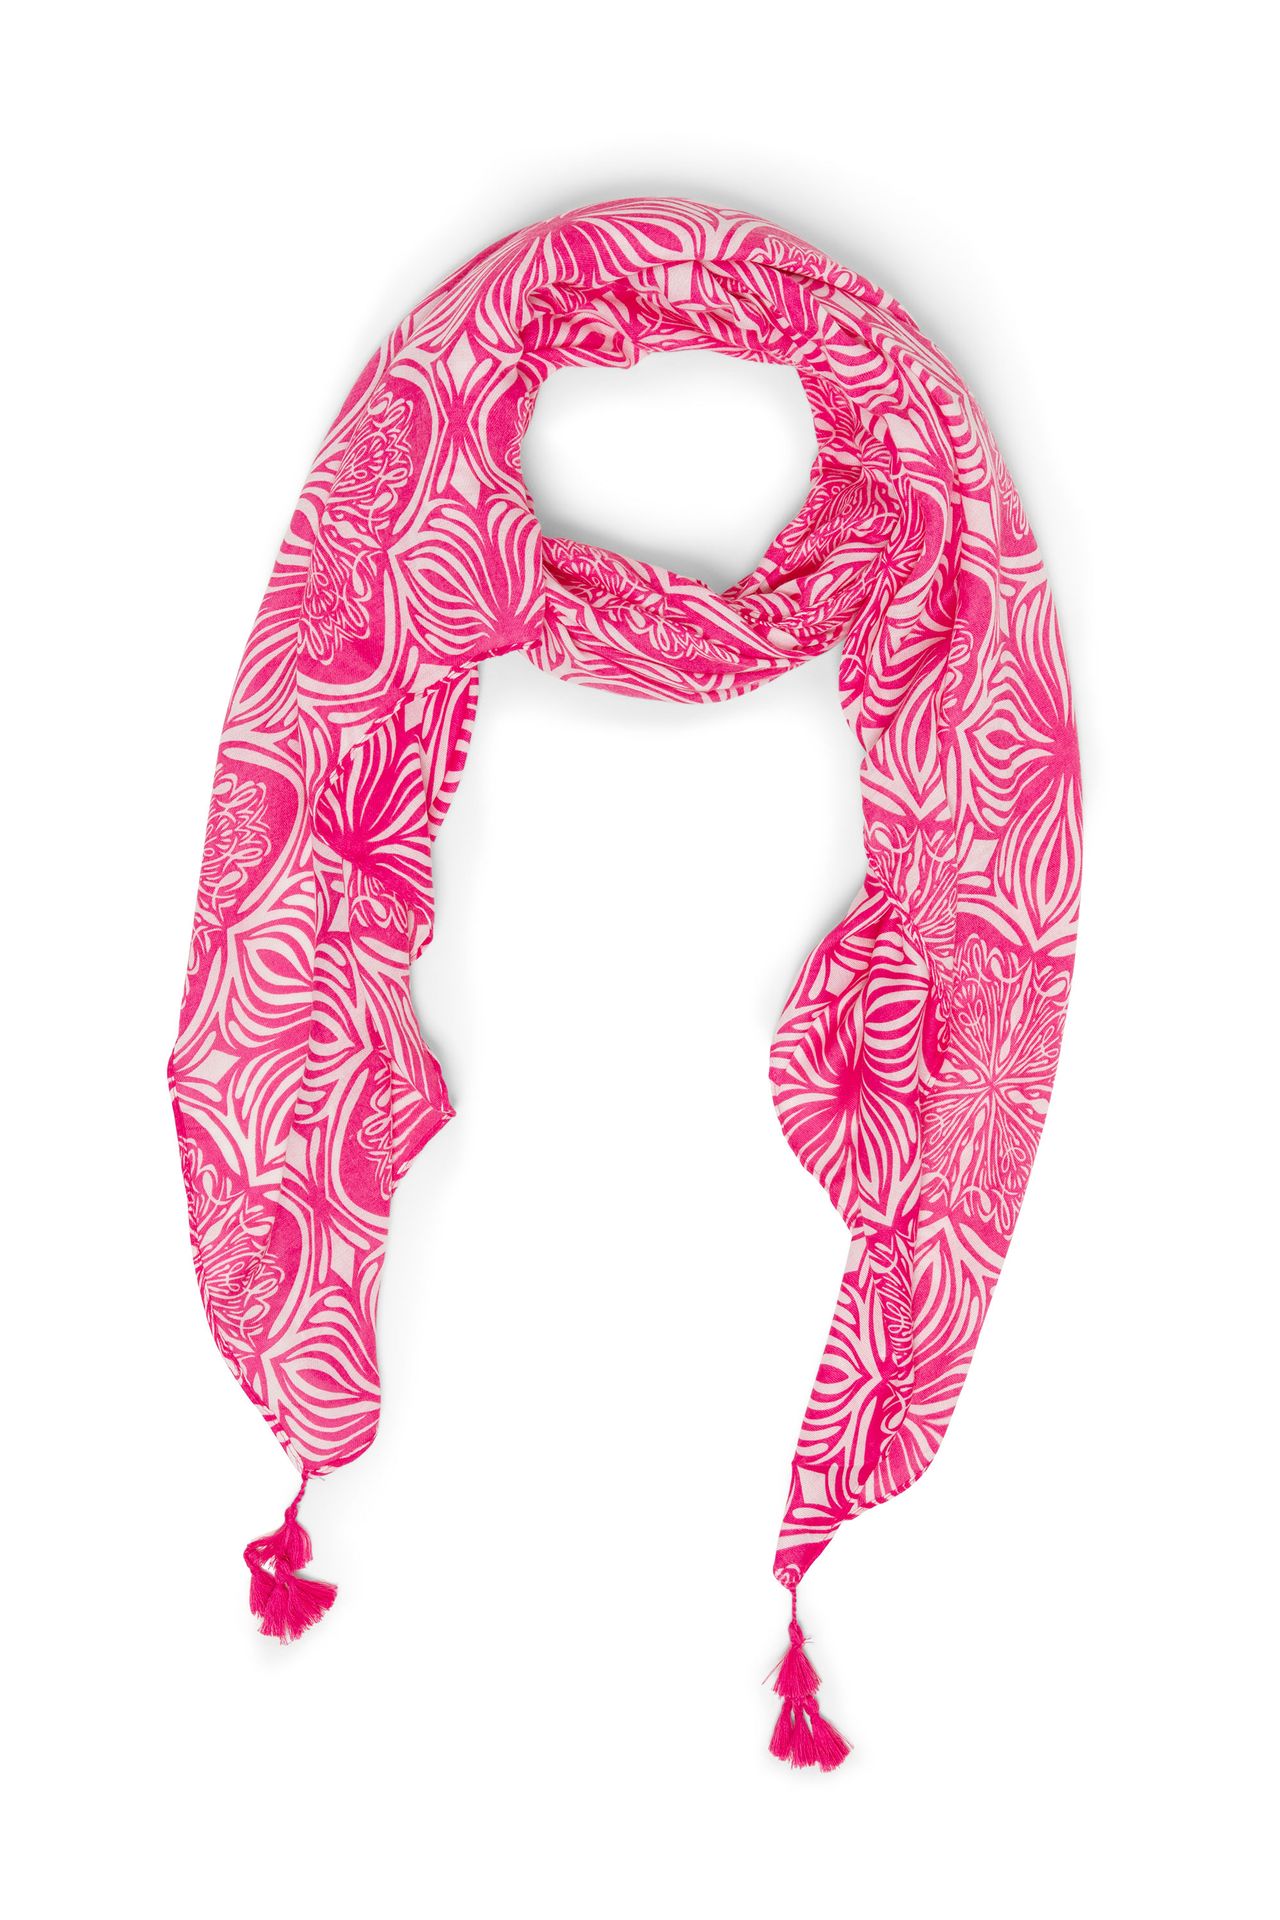 Norah Sjaal roze/wit pink/white 213574-931